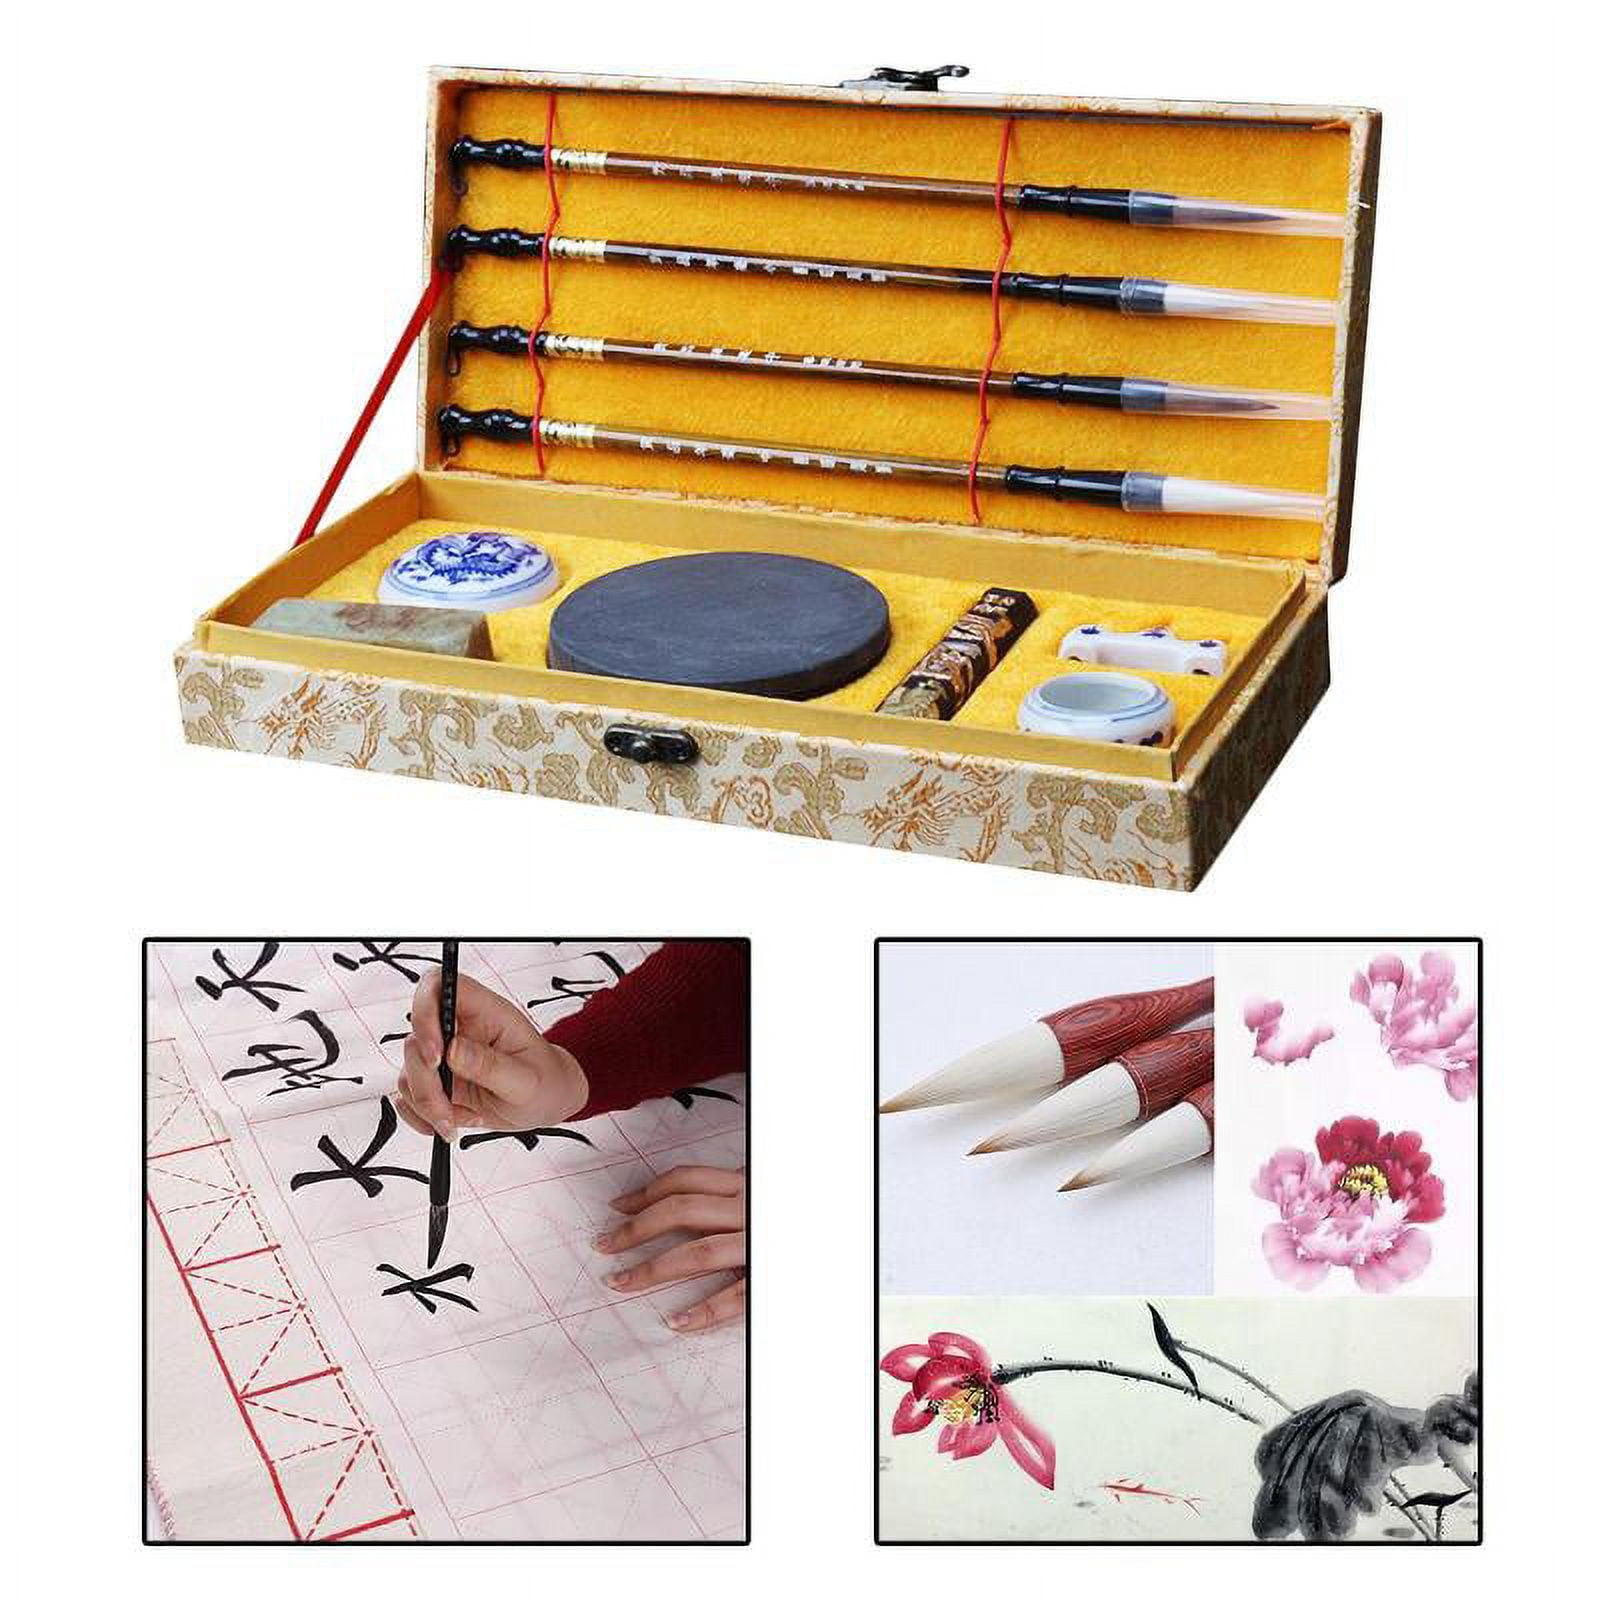 HorBous 7 PCS Chinese Calligraphy Inkstone + water bowl + Ink stick + 2  Brush Pens + Ink Spoon + Gift Box Set for Kids Child Beginner